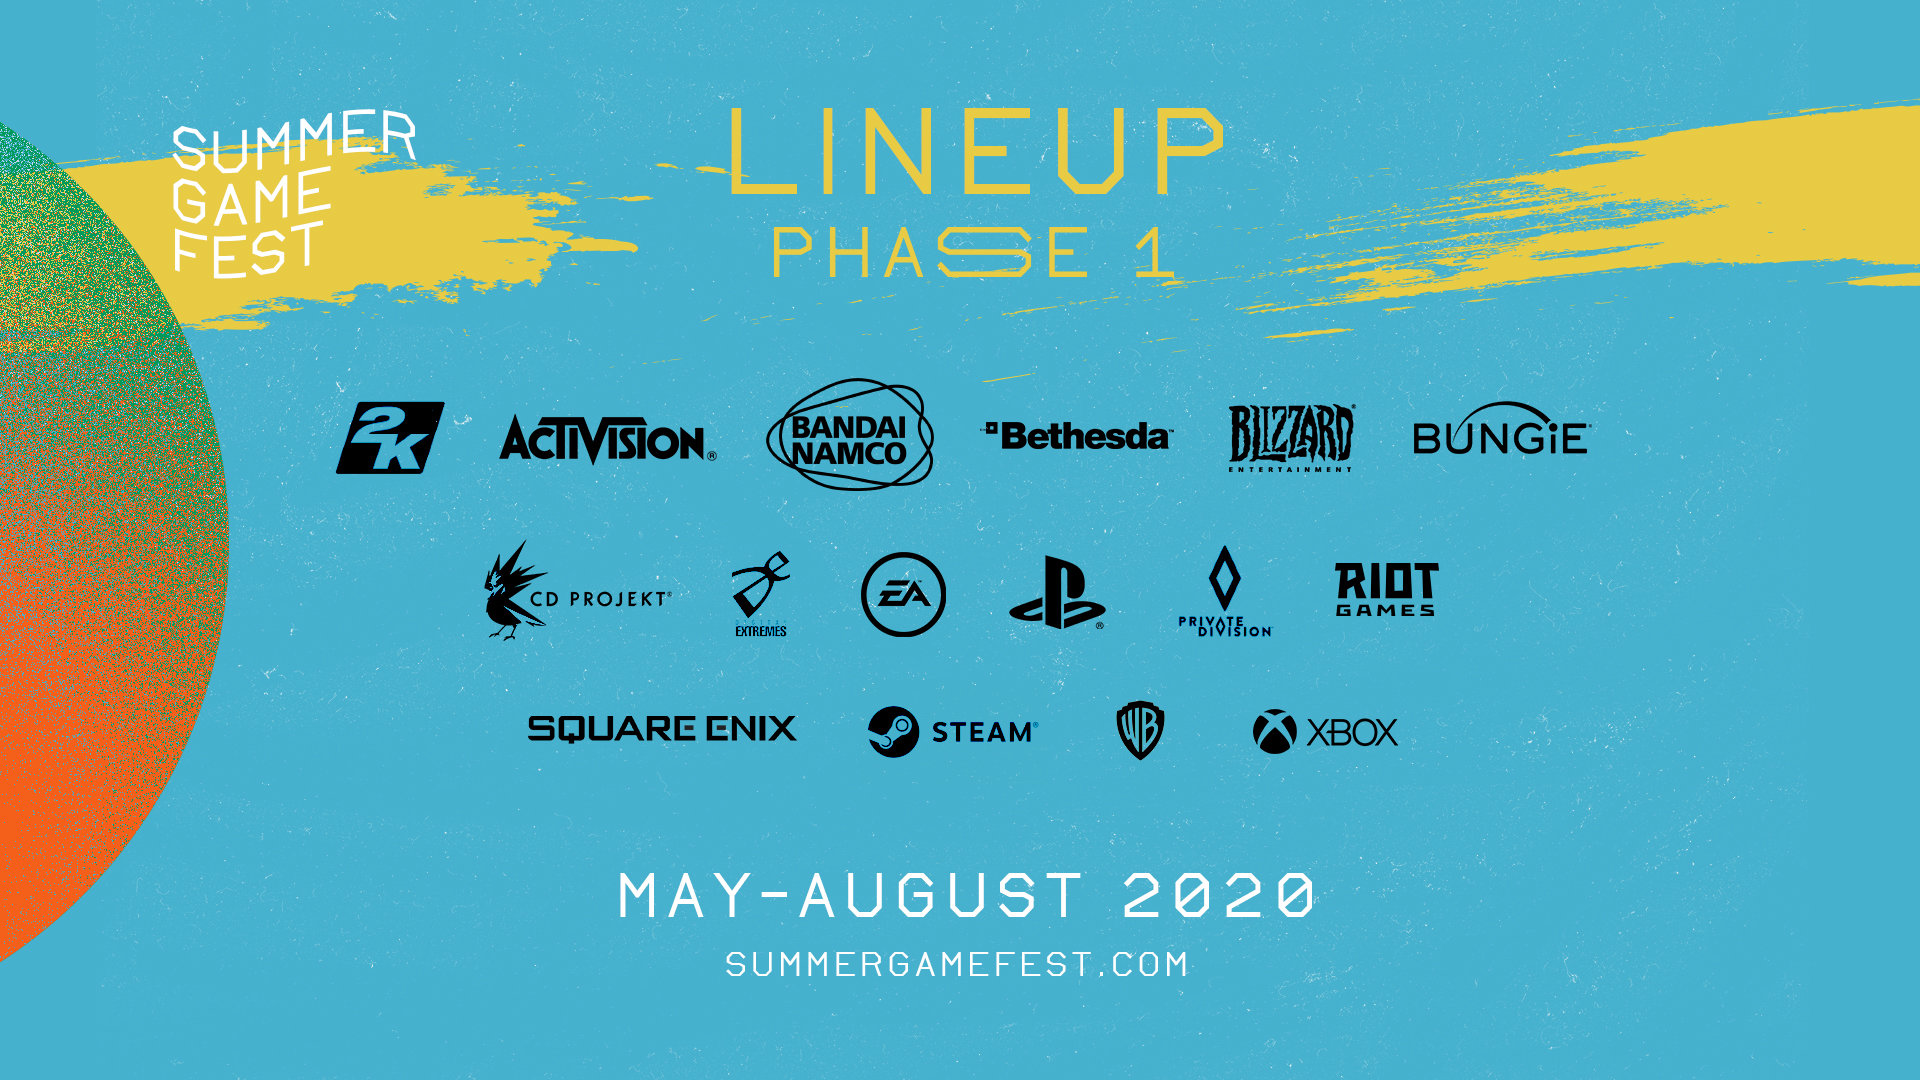 Geoff Keighley's Summer Game Fest hopes to be digital gaming event hub